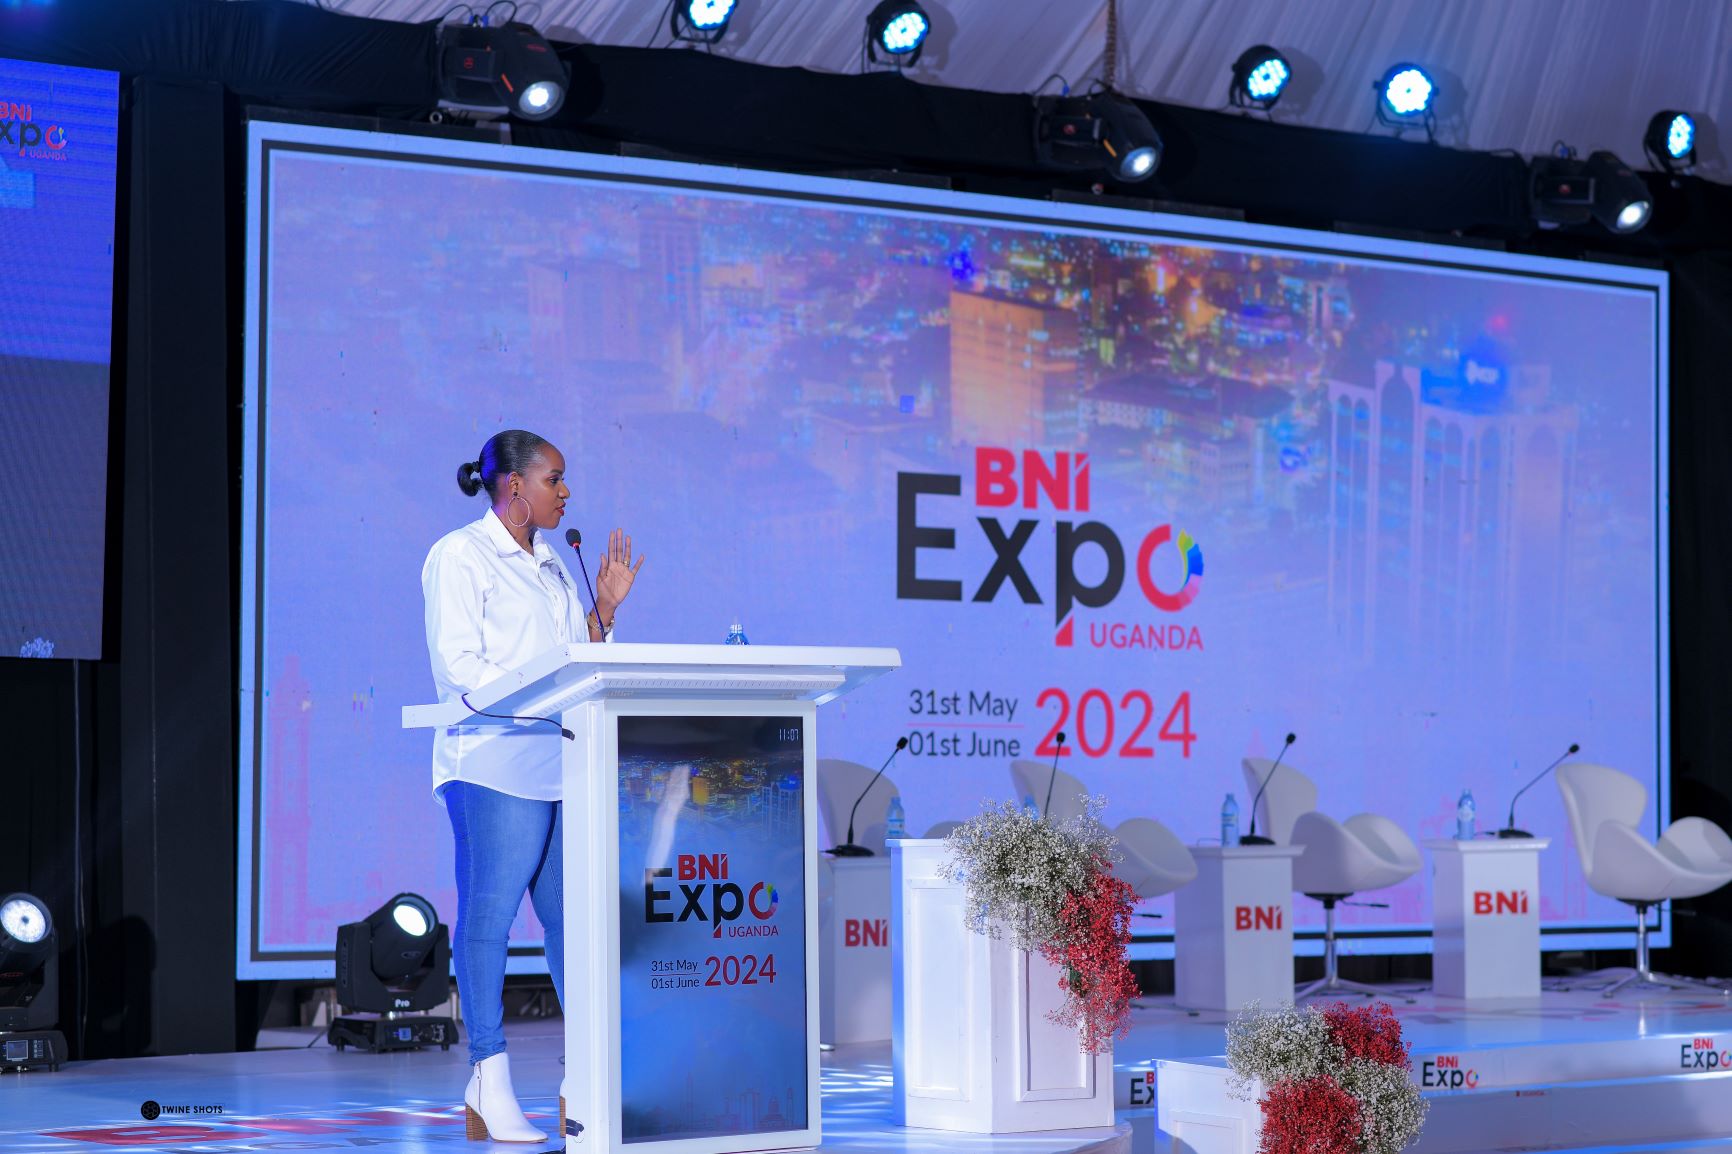 Uganda’s business community to reap benefit as BNI Expo opens